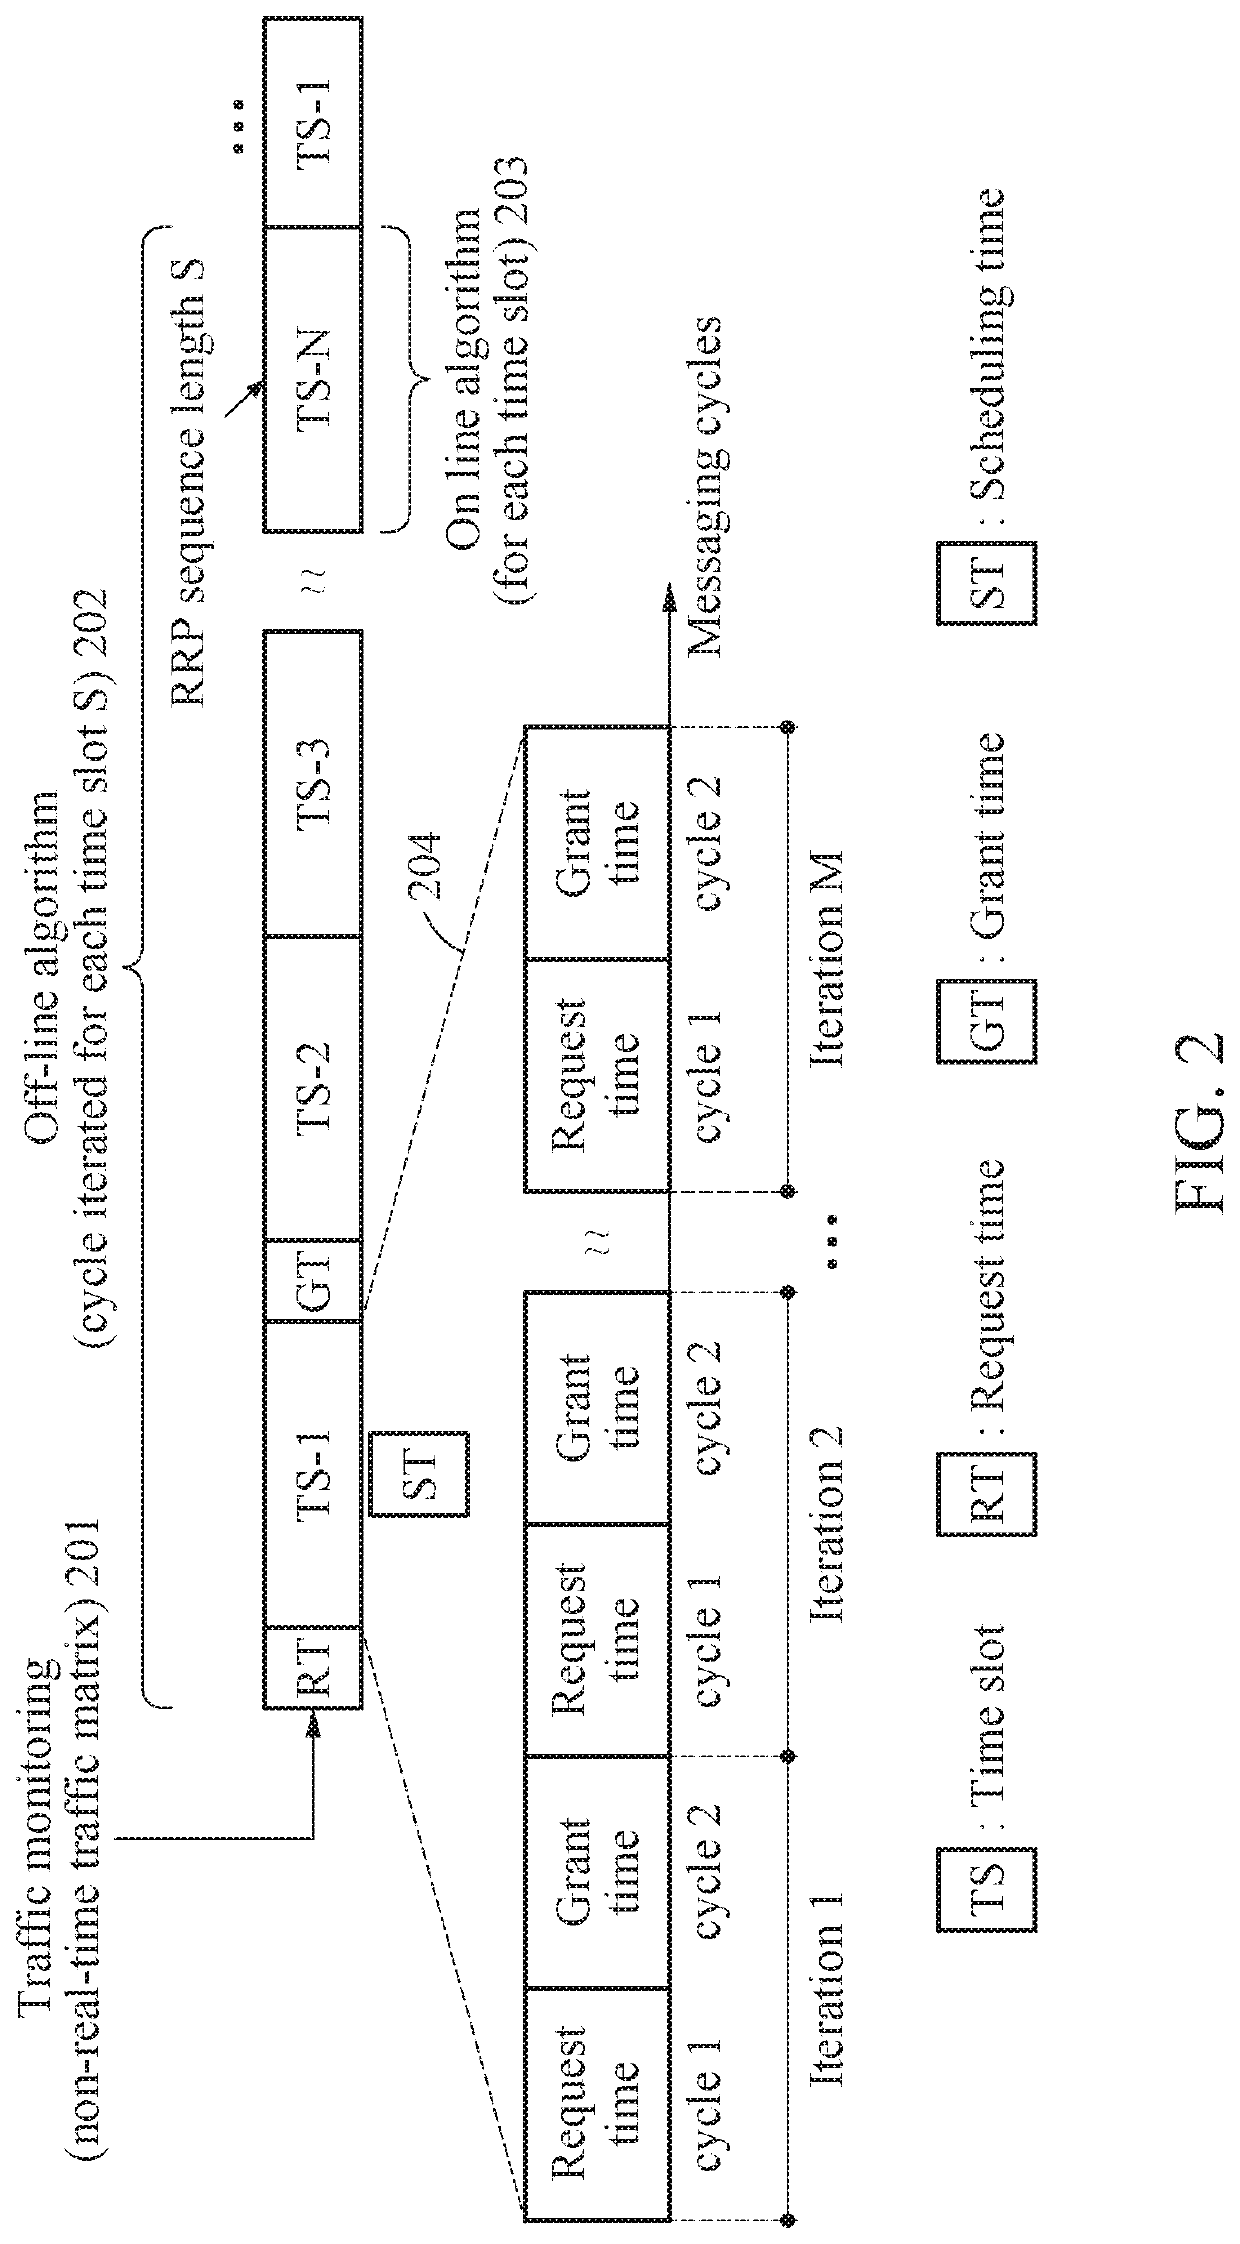 Centralized scheduling apparatus and method considering non-uniform traffic